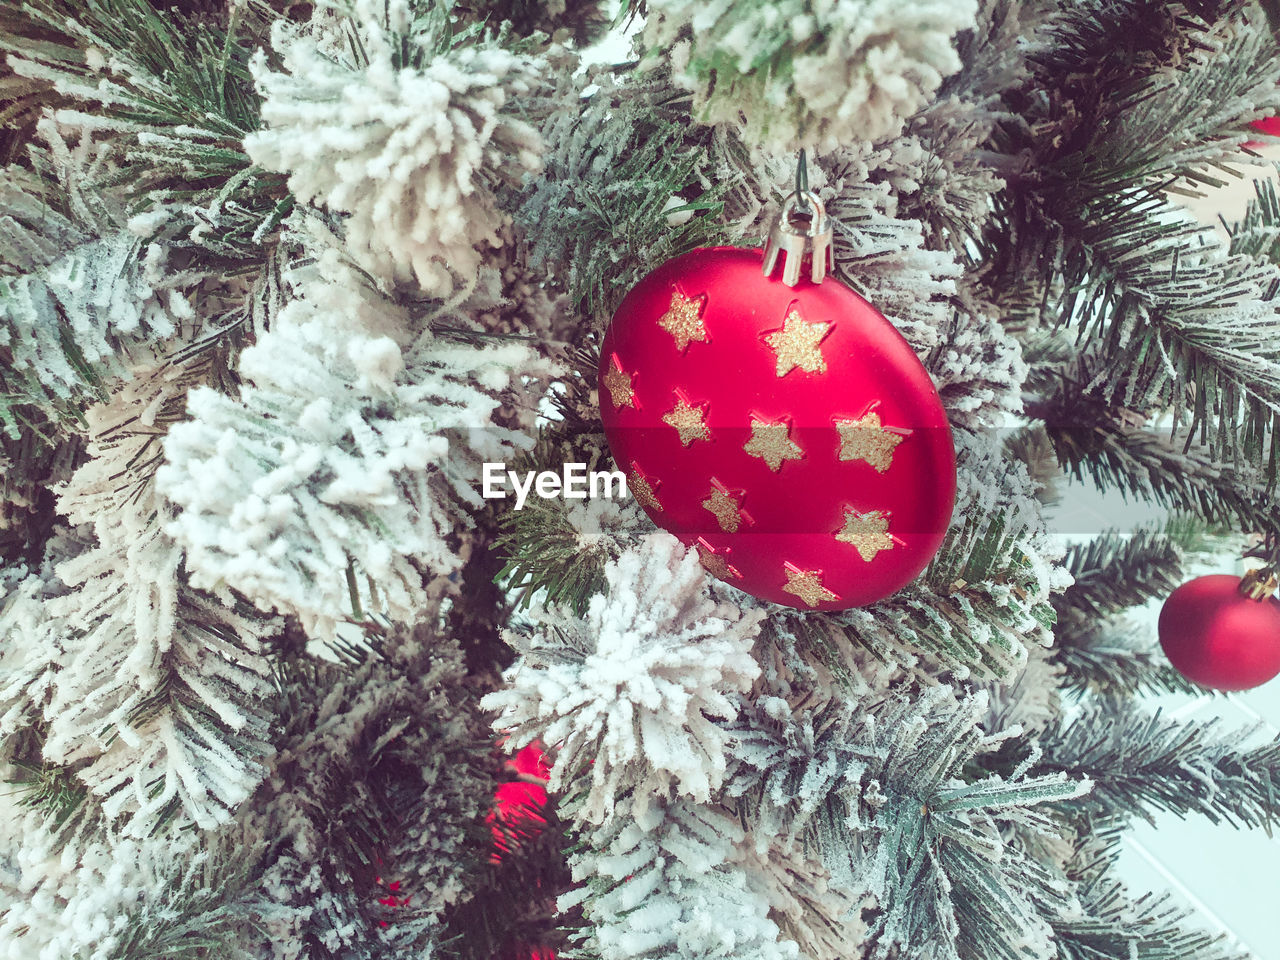 Close up view of a red christmas ball hanging on christmas tree